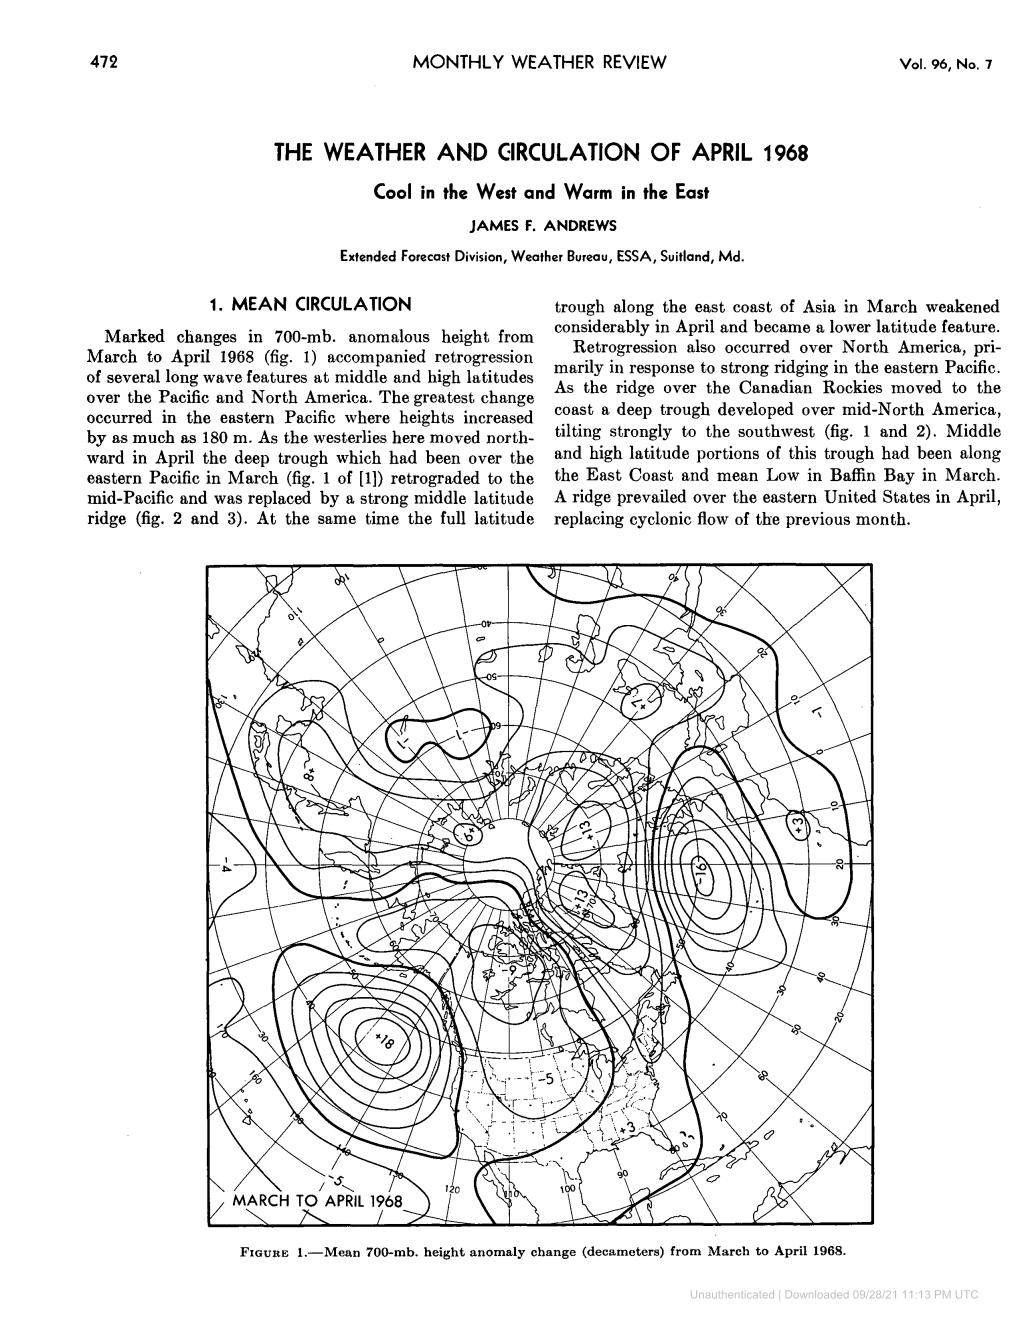 The Weather and Circulation of April 1968